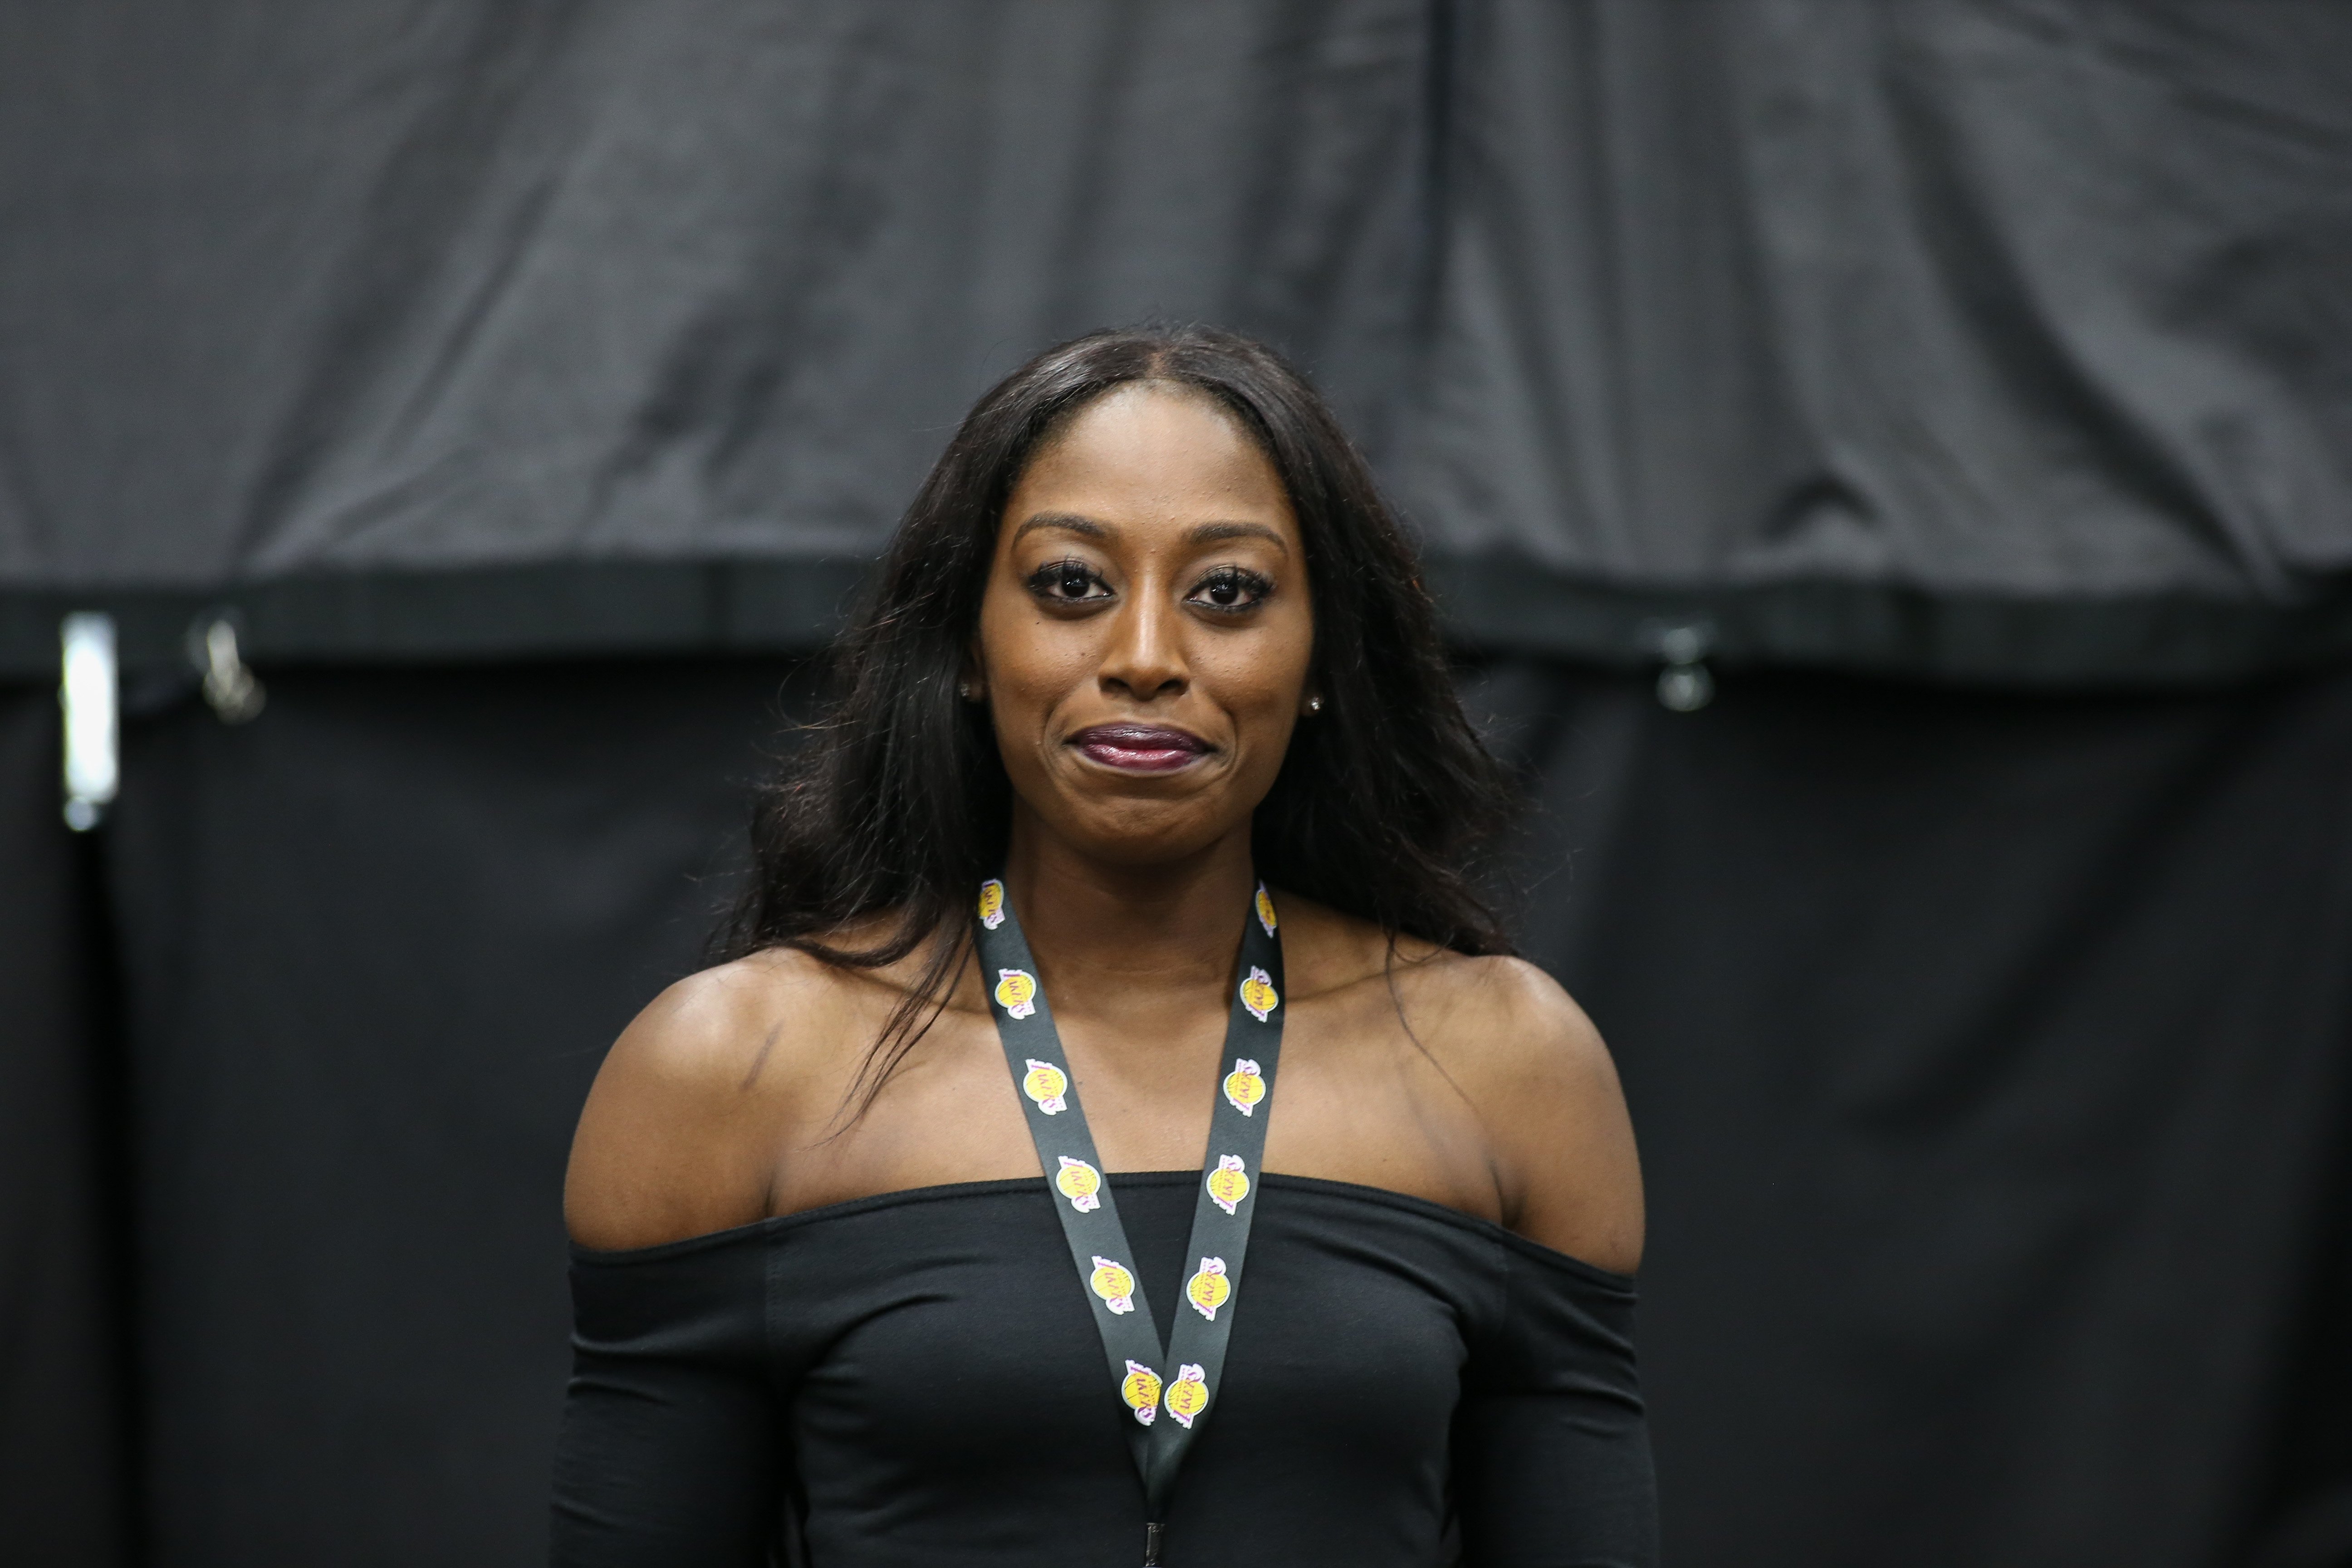 ESPN analyst Chiney Ogwumike during the Los Angeles Lakers Media Day